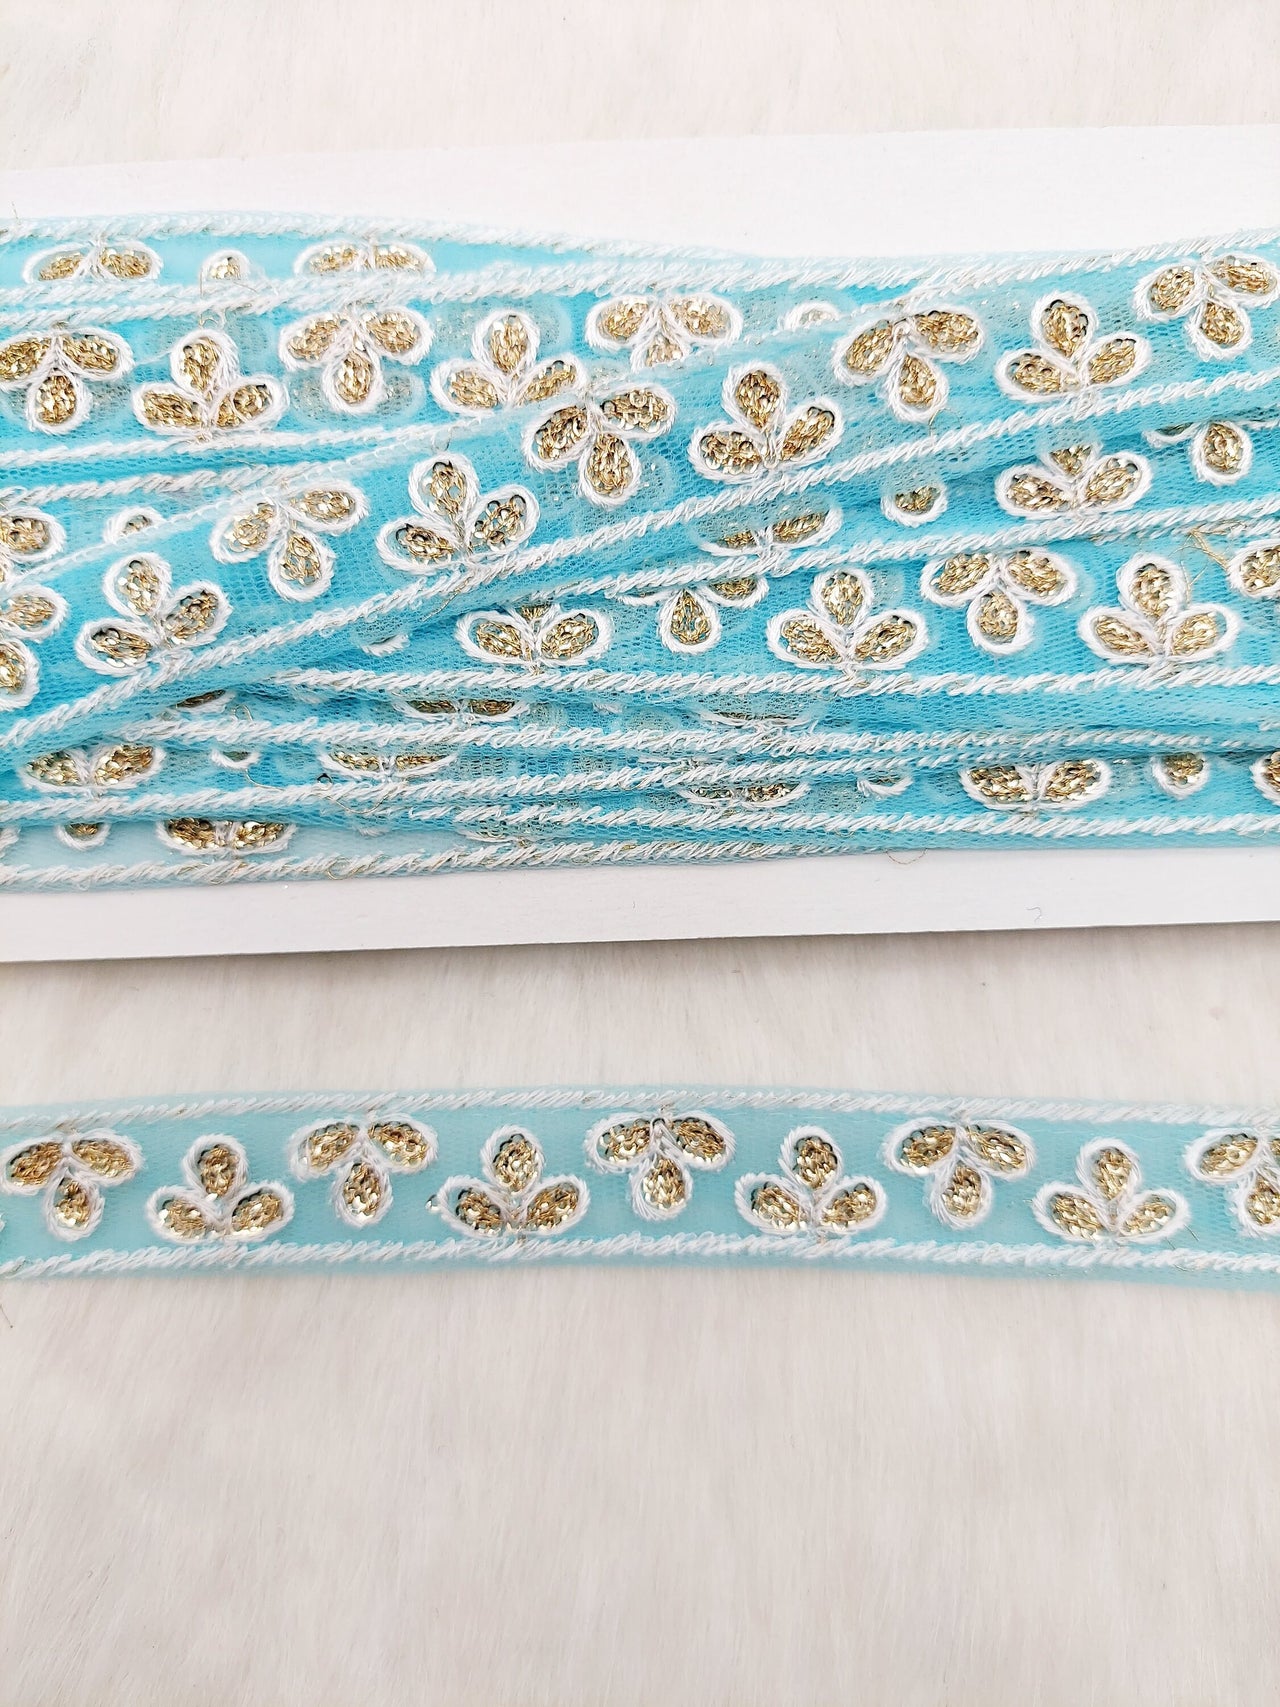 Wholesale Sky Blue Net Lace Floral Embroidery & Glitter Gold Sequins, Indian Wedding Border, Gifting Ribbon Costume Trim Fashion Trimming